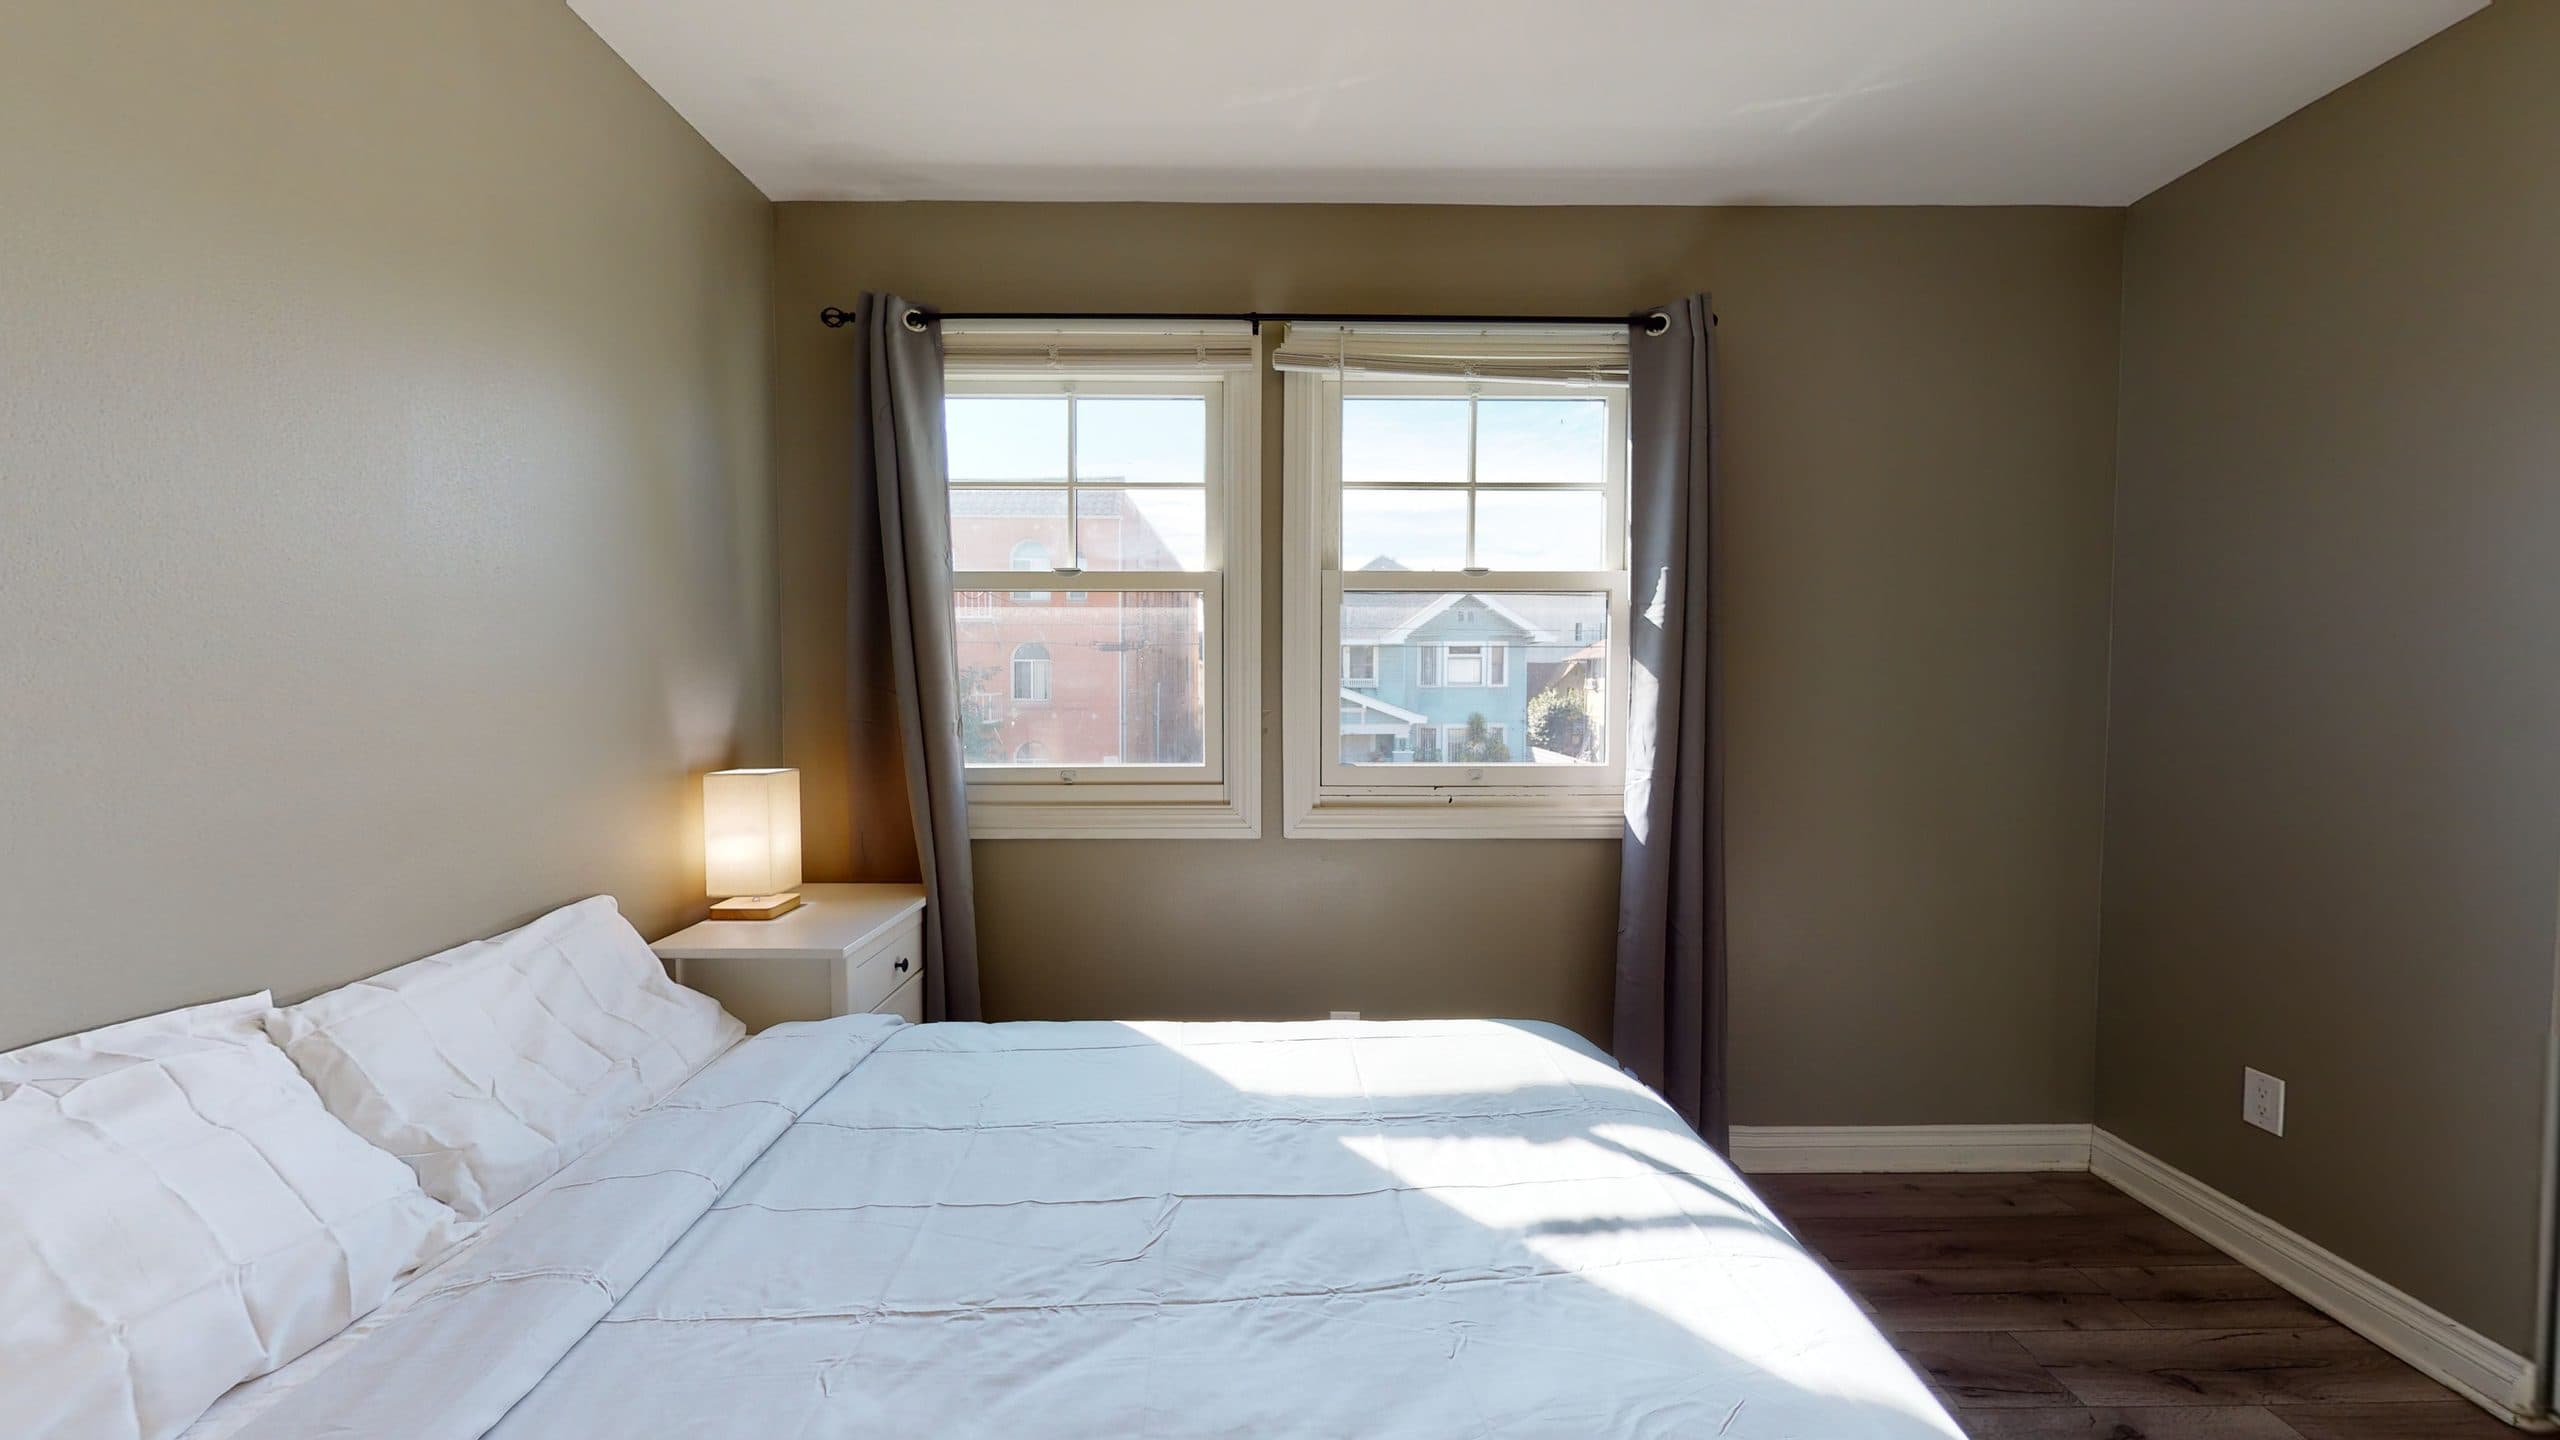 Photo 3 of #2445: Queen Bedroom A (Furnished only) at June Homes